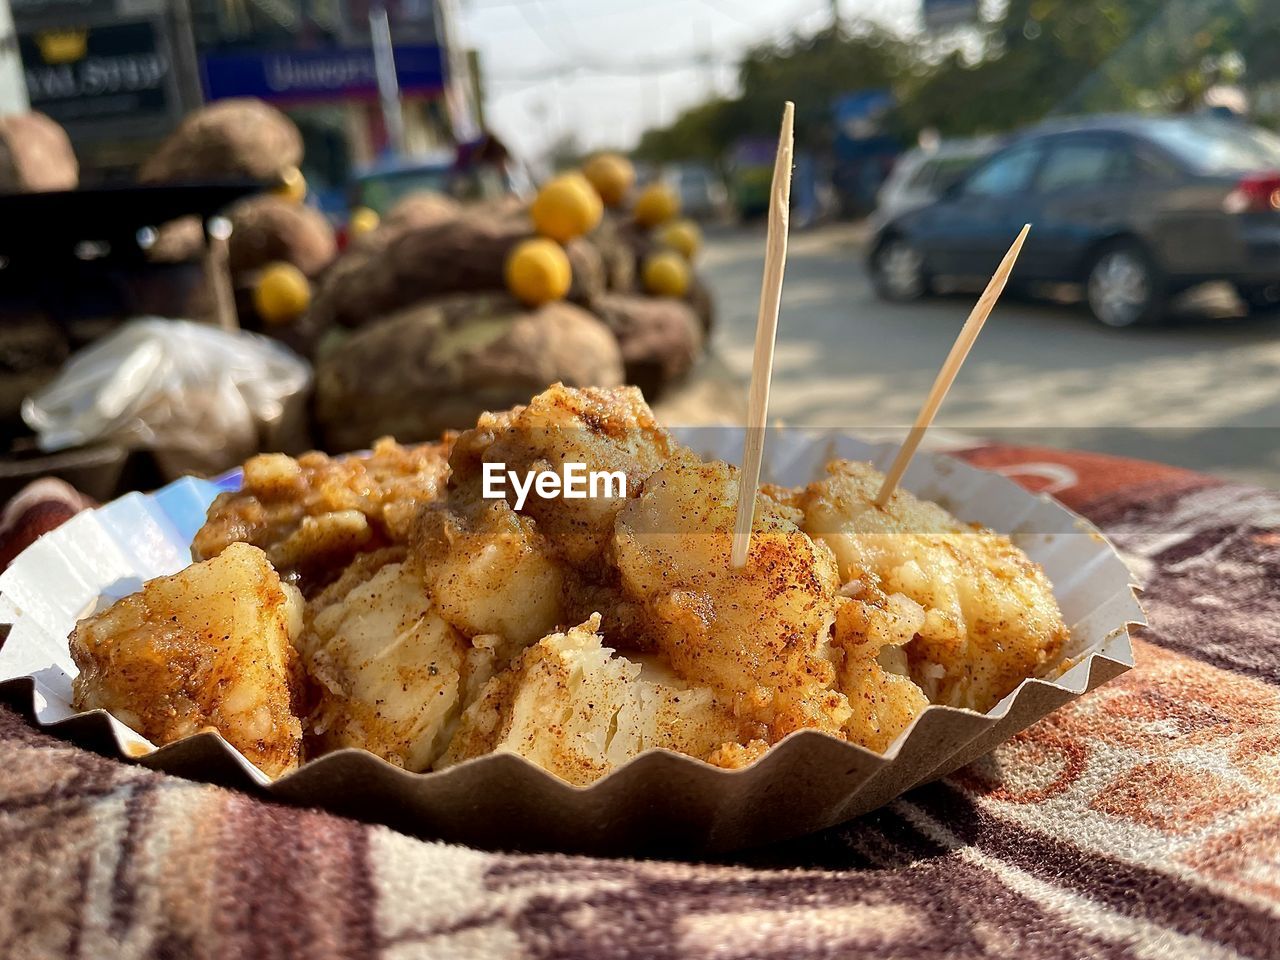 Sweet potato vegetable fruit salad in plate on street cart table with street background view 